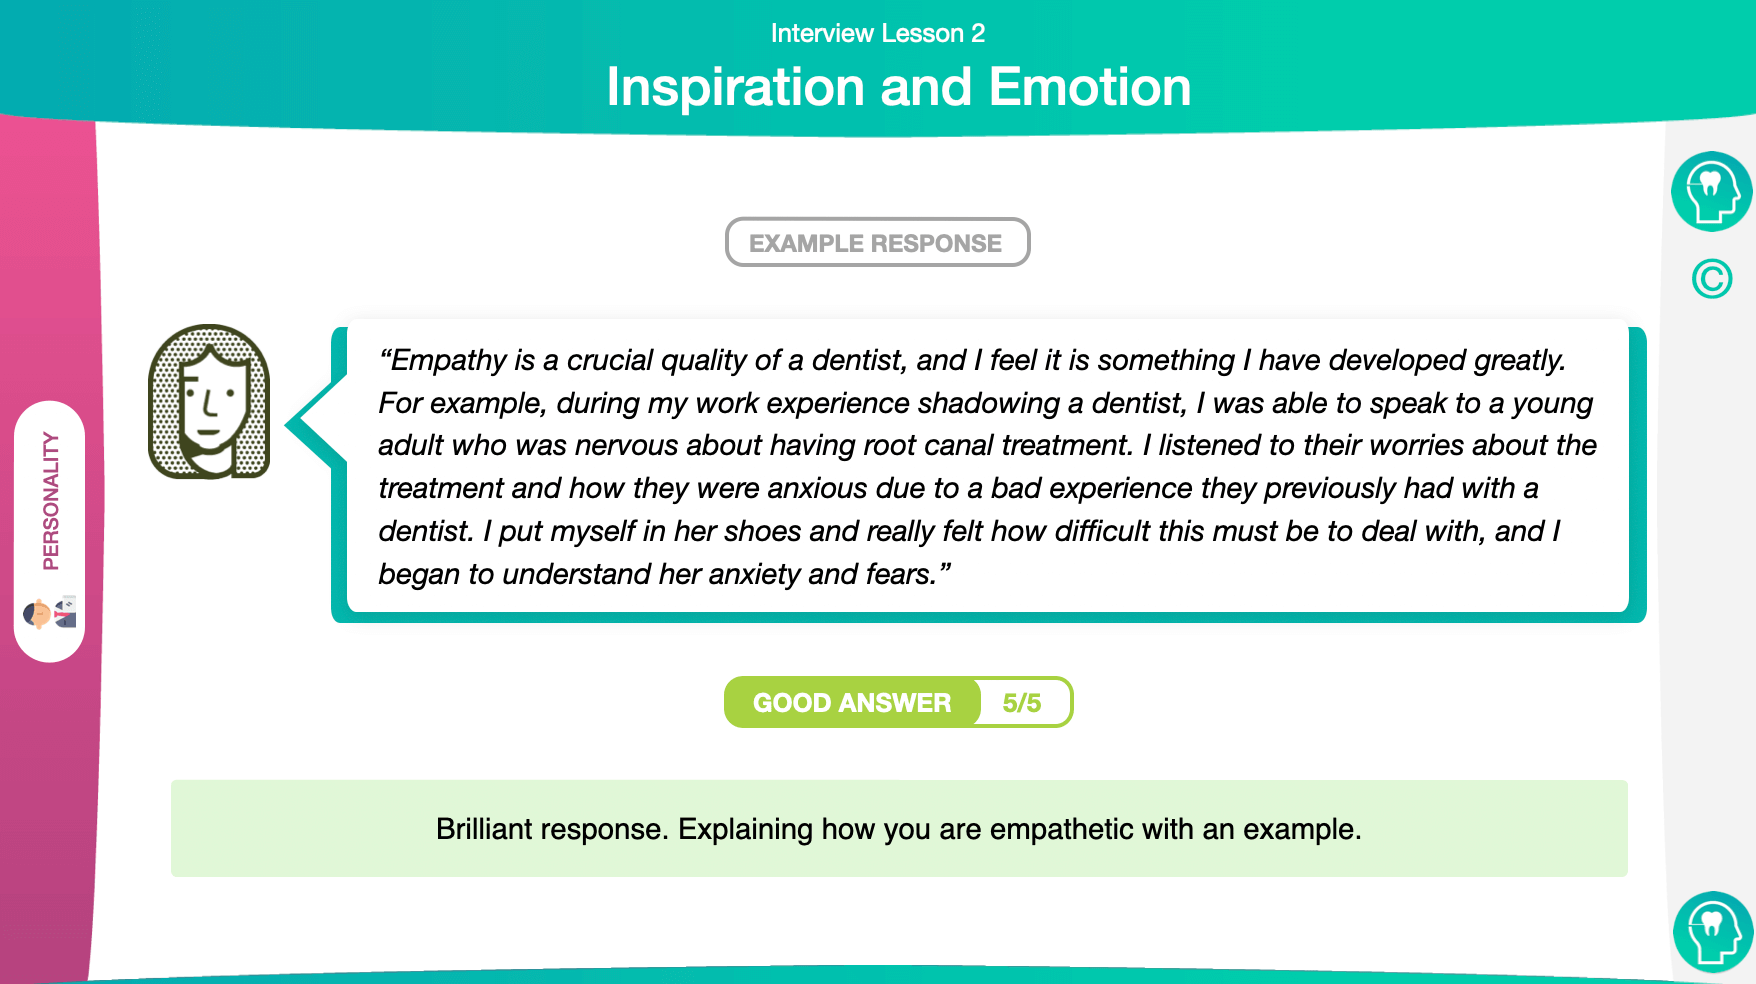 Inspiration and Emotion